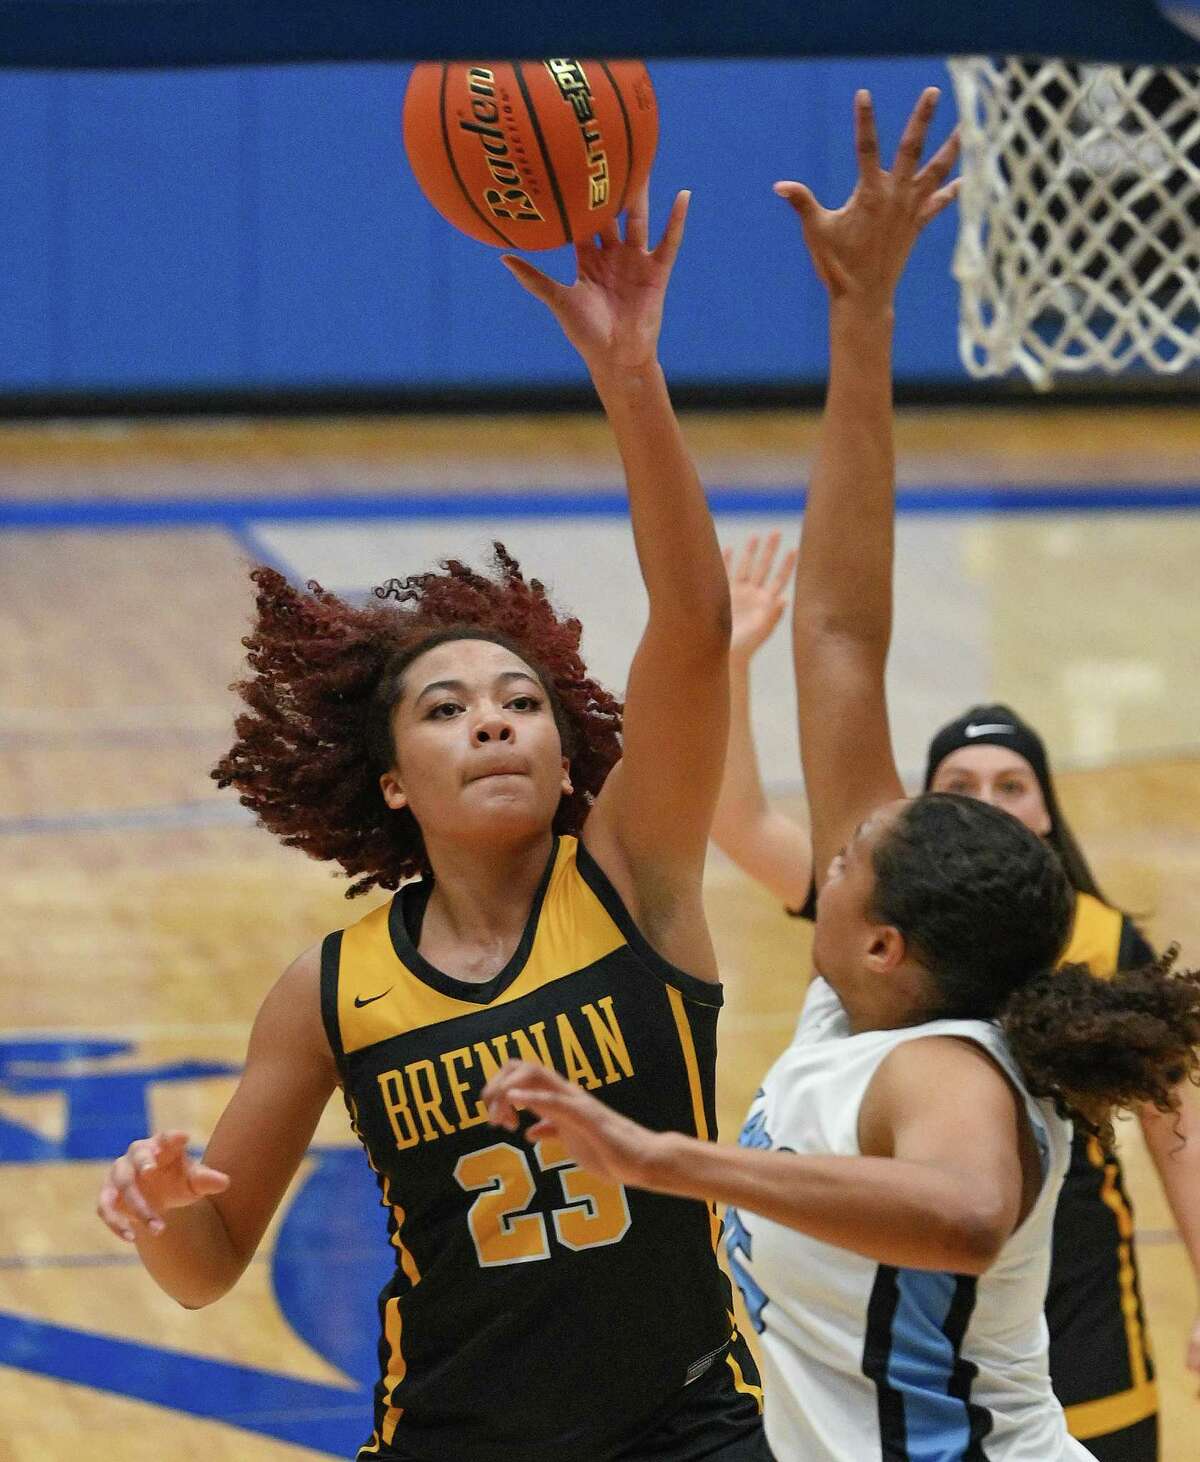 Bella Flemings (23) of Brennan shoots and scores against Harlan during high school girls basketball action at the Northside Sports Gym on Tuesday, Jan. 17, 2023. Brennan won in overtime, 73-71.